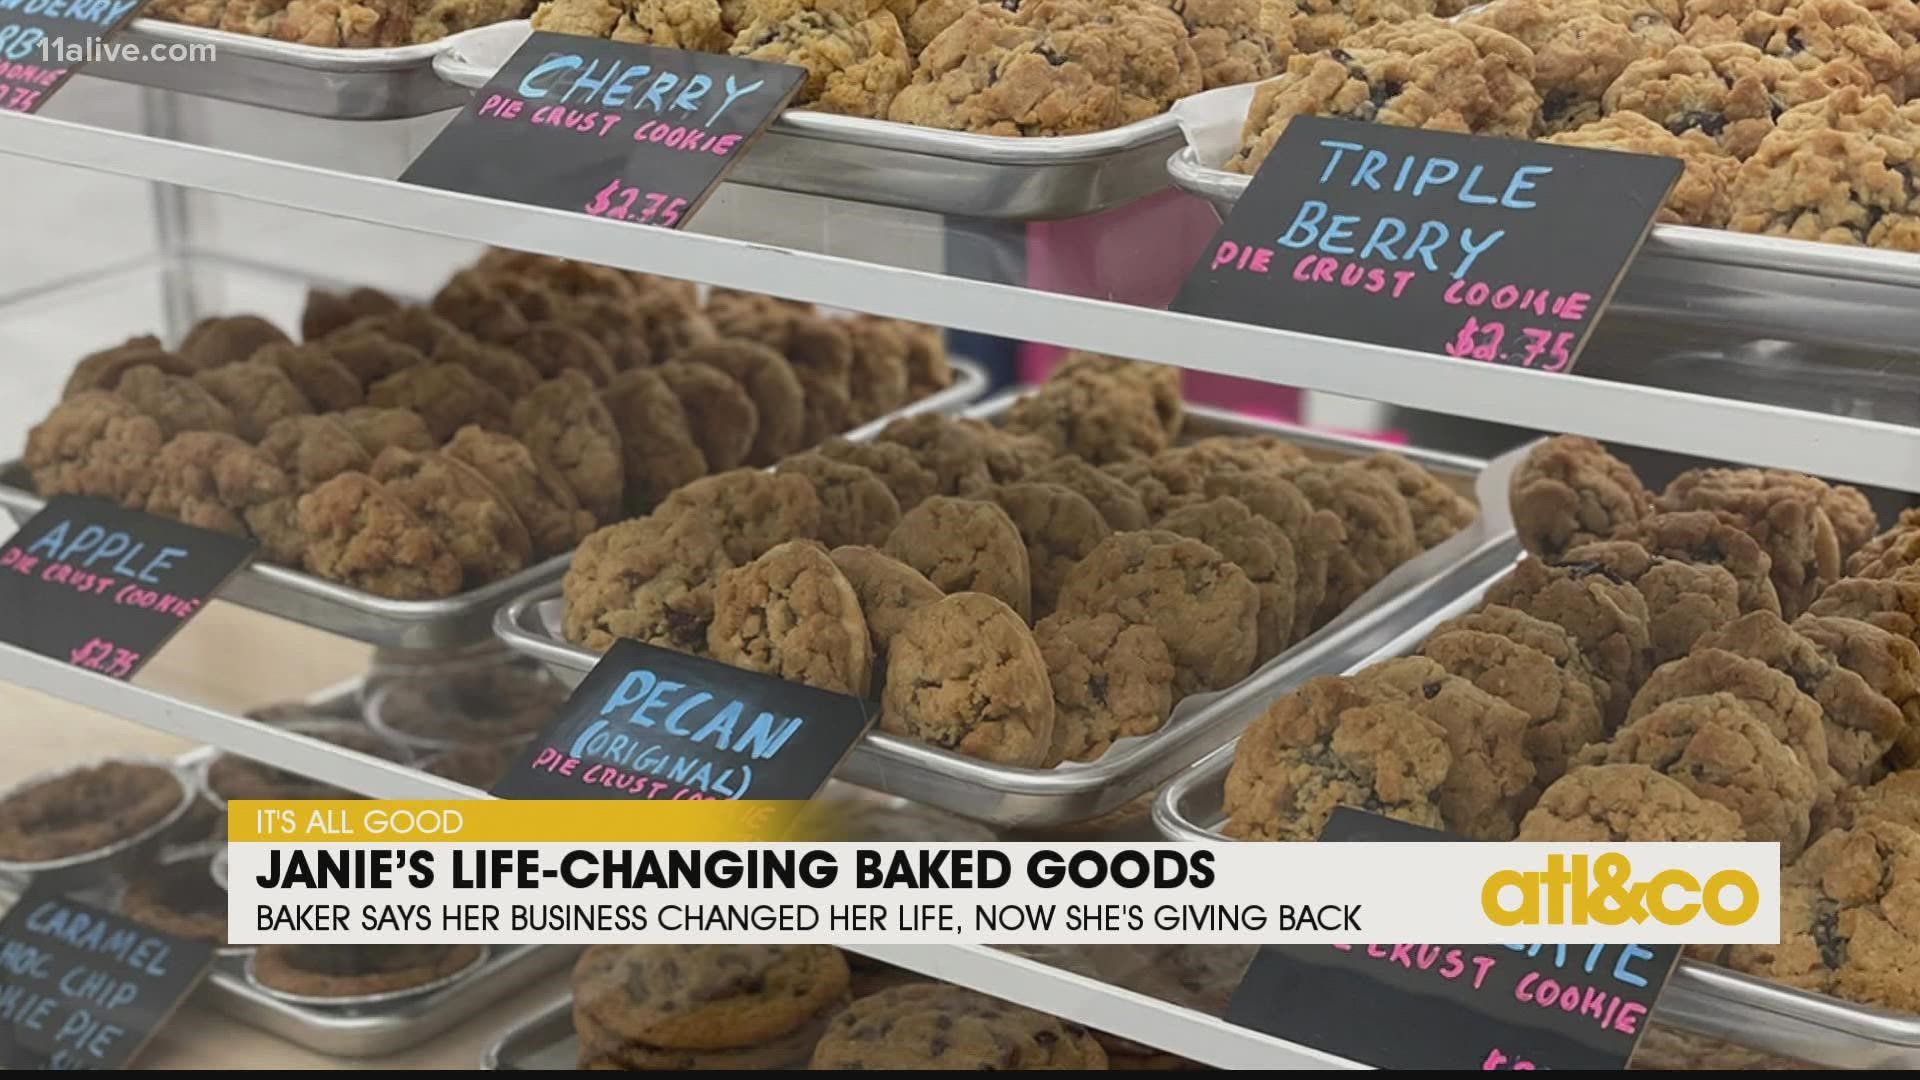 Janie's Life-Changing Baked Goods! This baker spent years struggling with addiction and now she has her own business and is giving back.